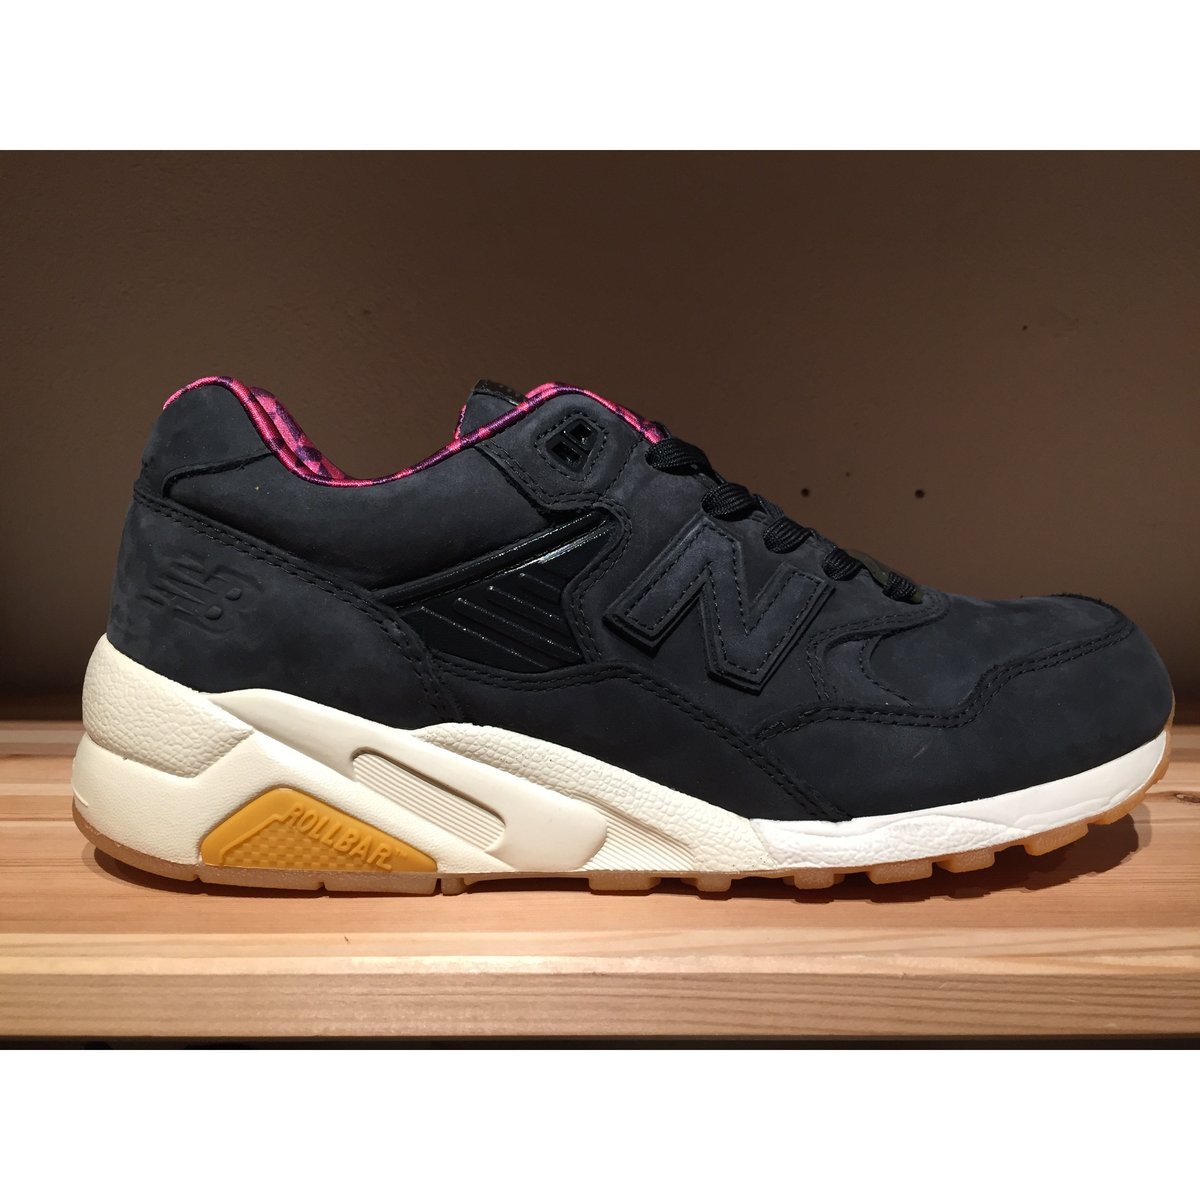 ☆STUSSY・UNDEFEATED・MAD HECTICコラボ - NEW BALANCE MT580 UPR